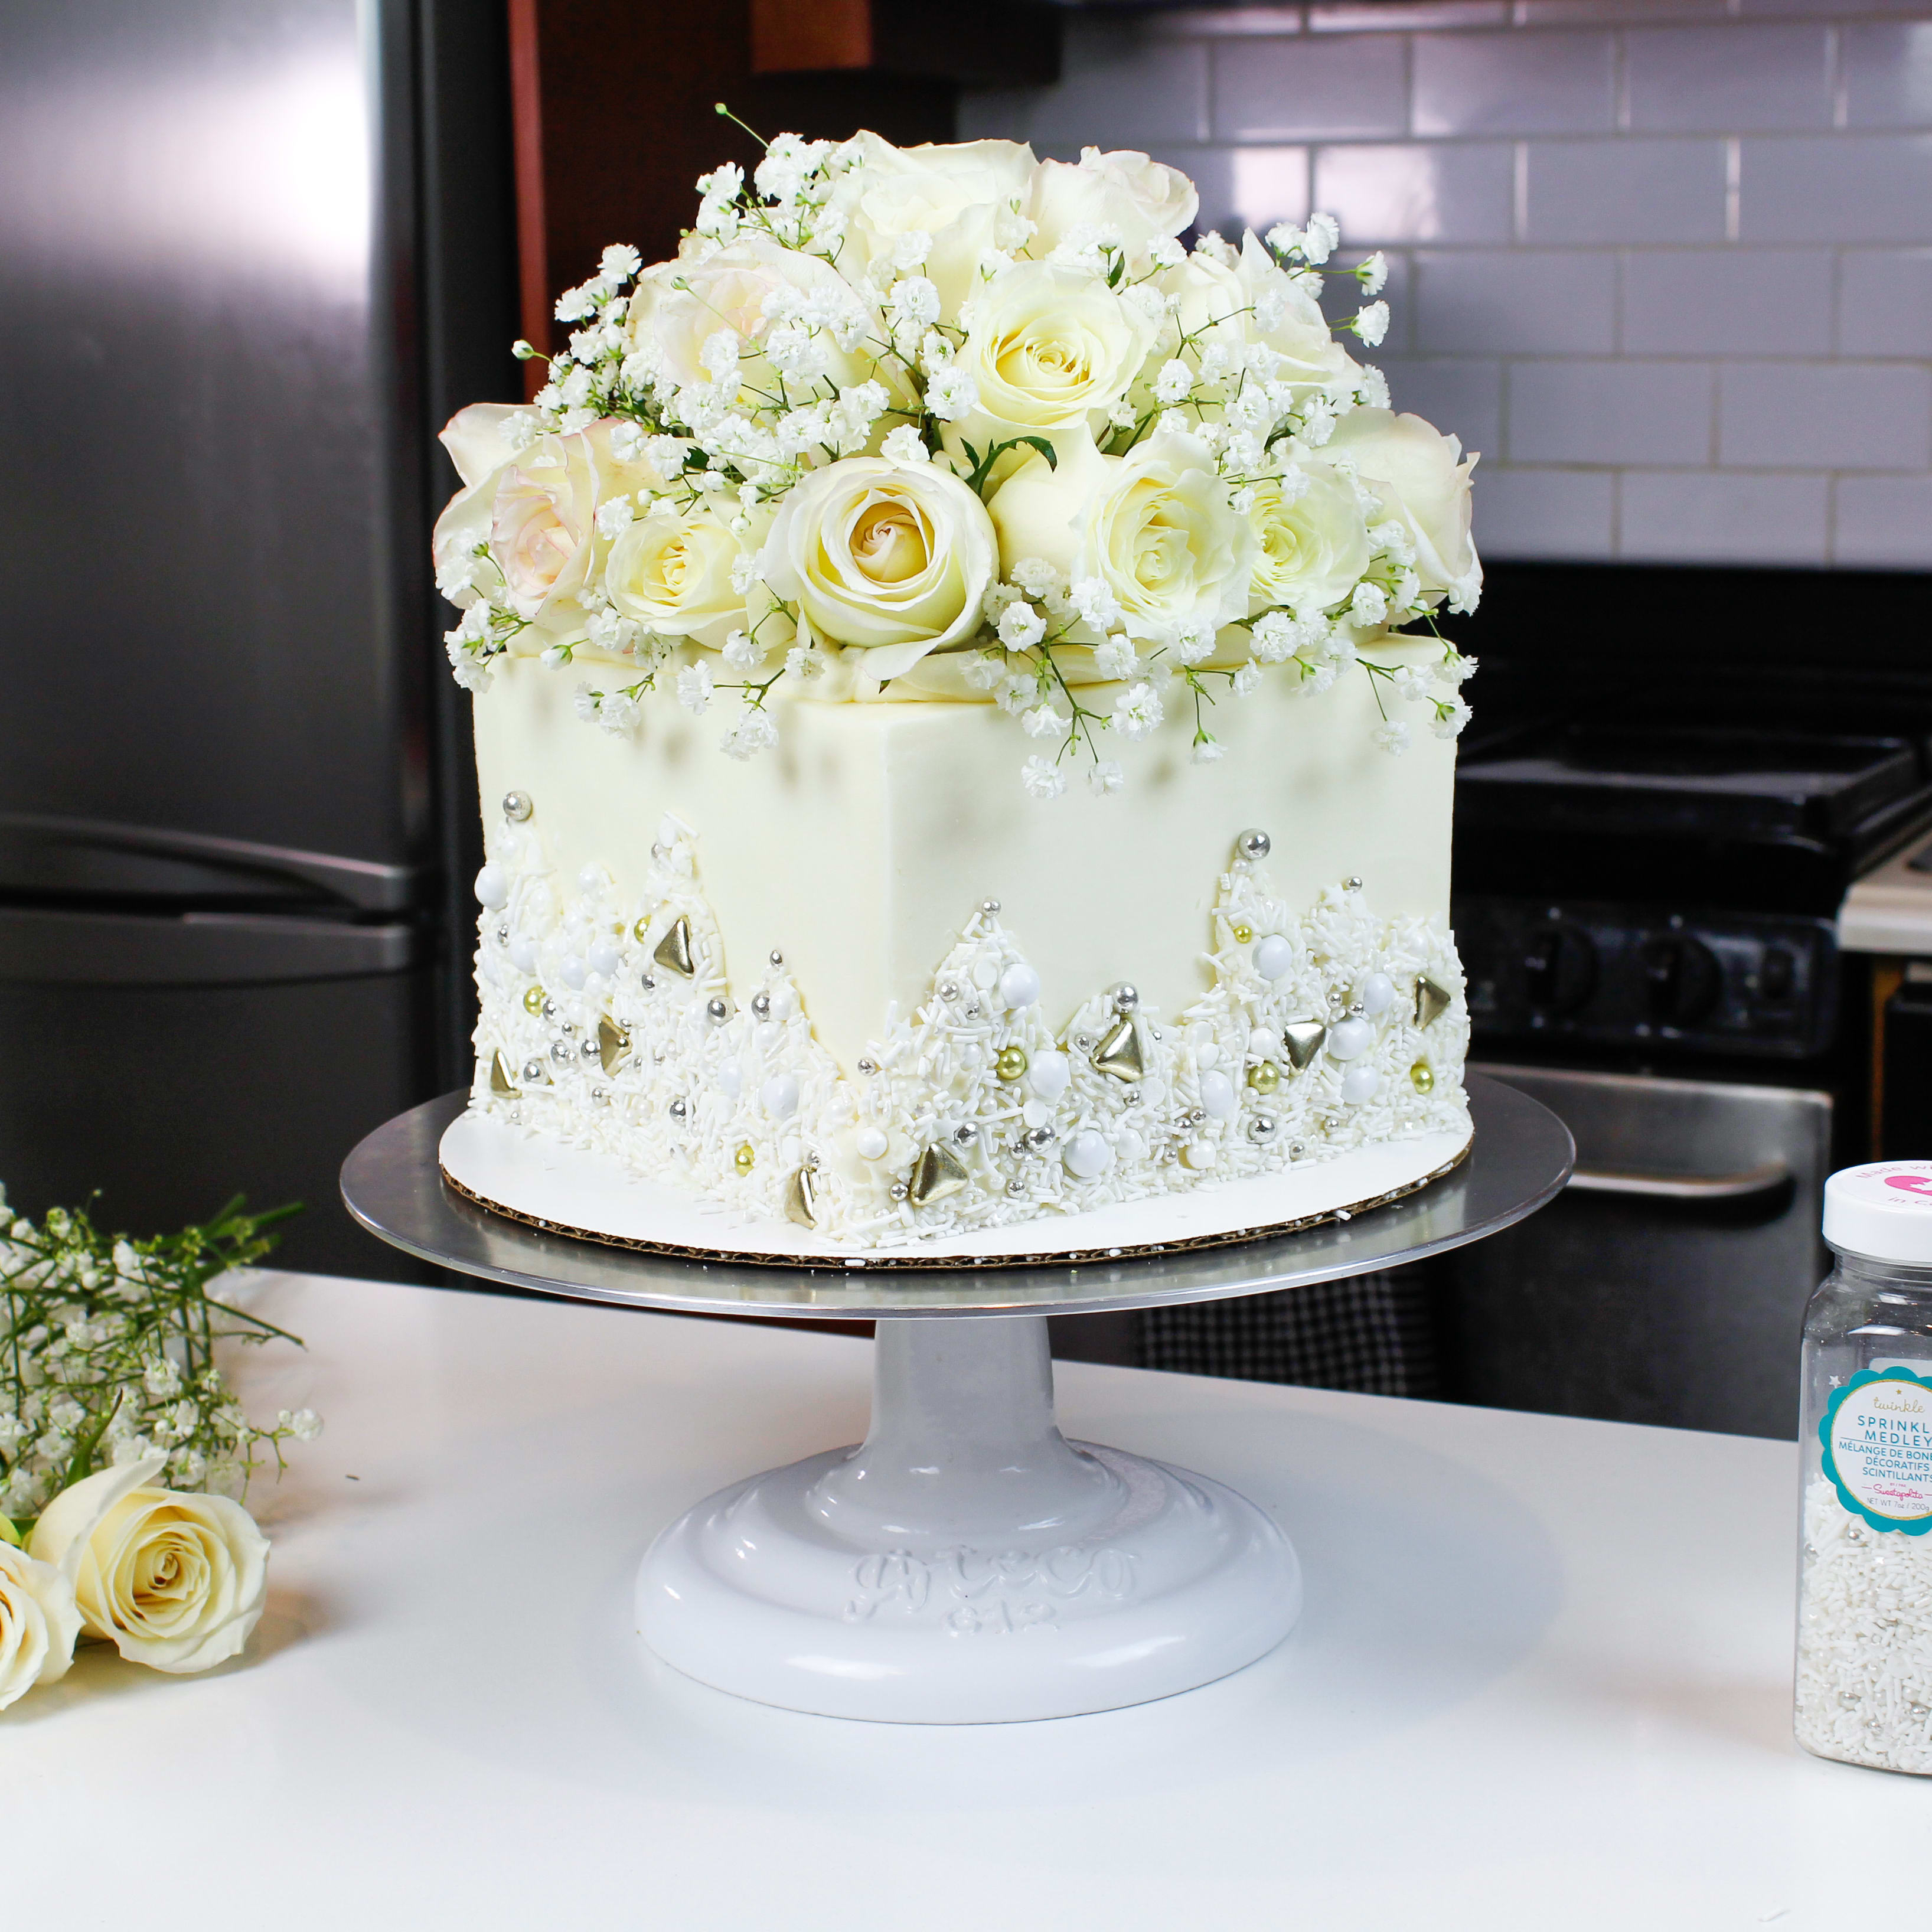 What to Know About Putting Flowers on Your Cakes